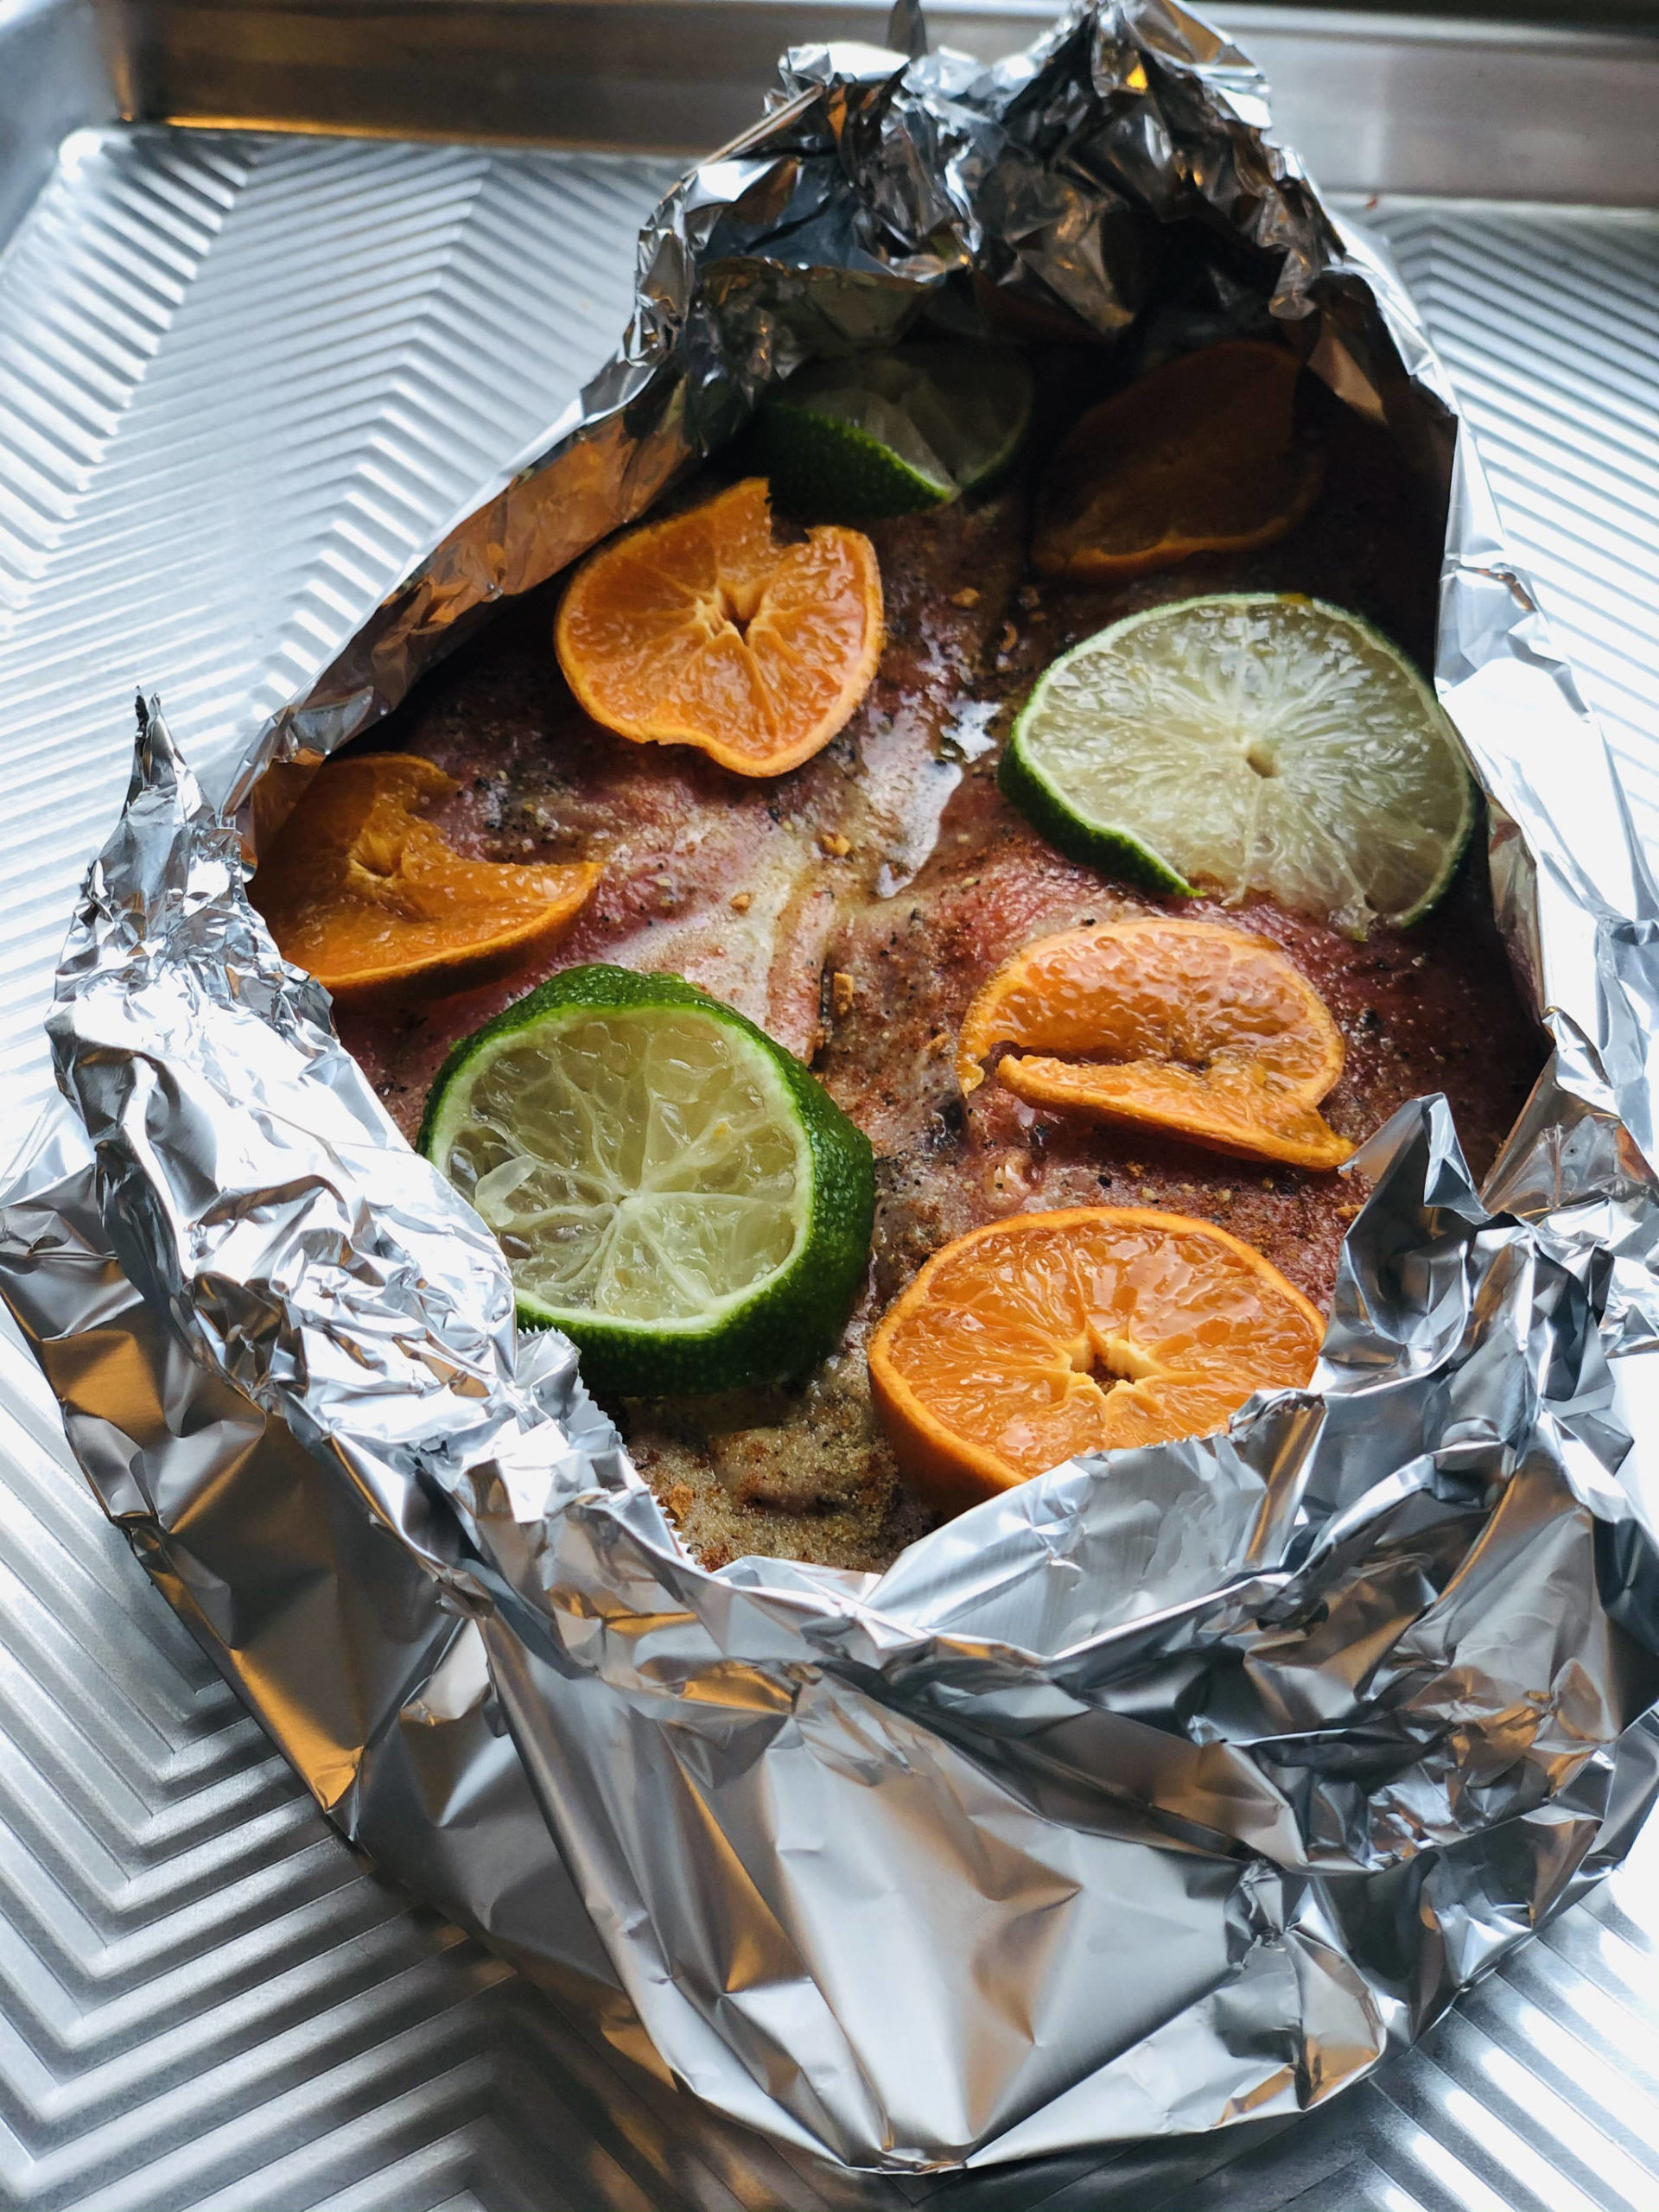 Victoria Petersen / Peninsula Clarion
Fresh citrus and pantry staples like taco seasoning and granulated garlic make for an easy and delicious baked salmon that’s ready to be enjoyed inside a taco.